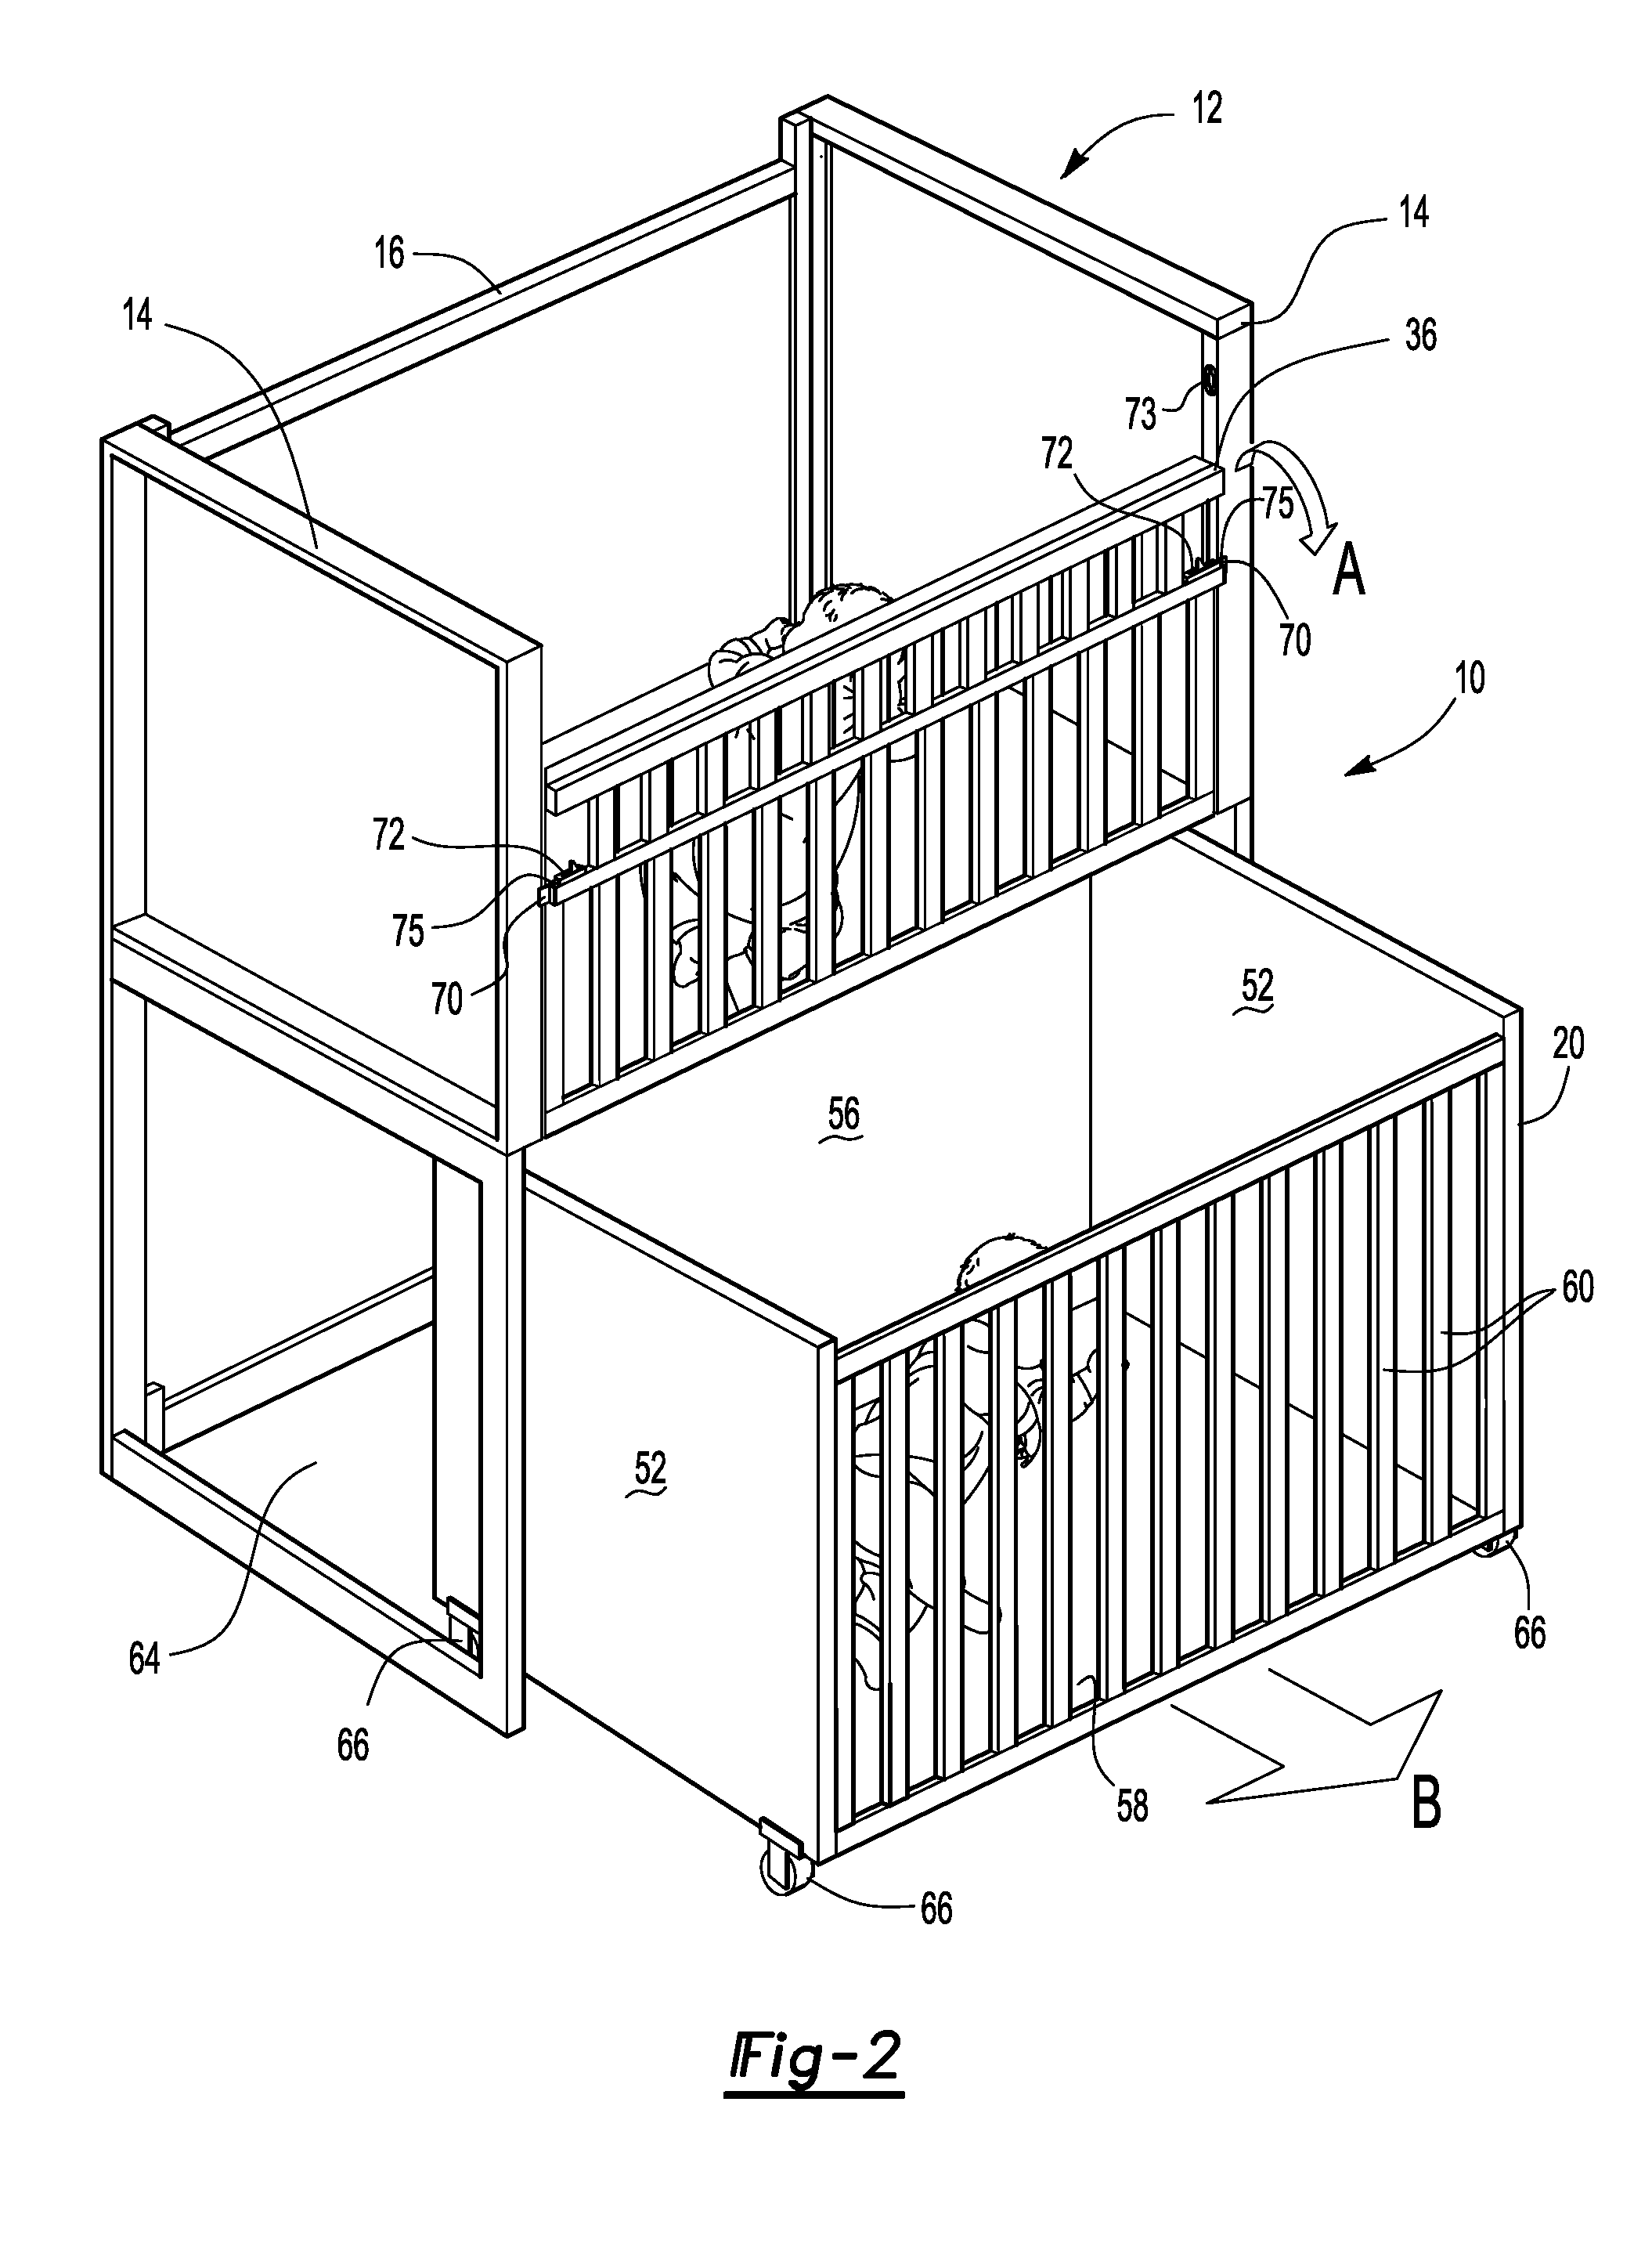 Crib set with stationary and moveable crib